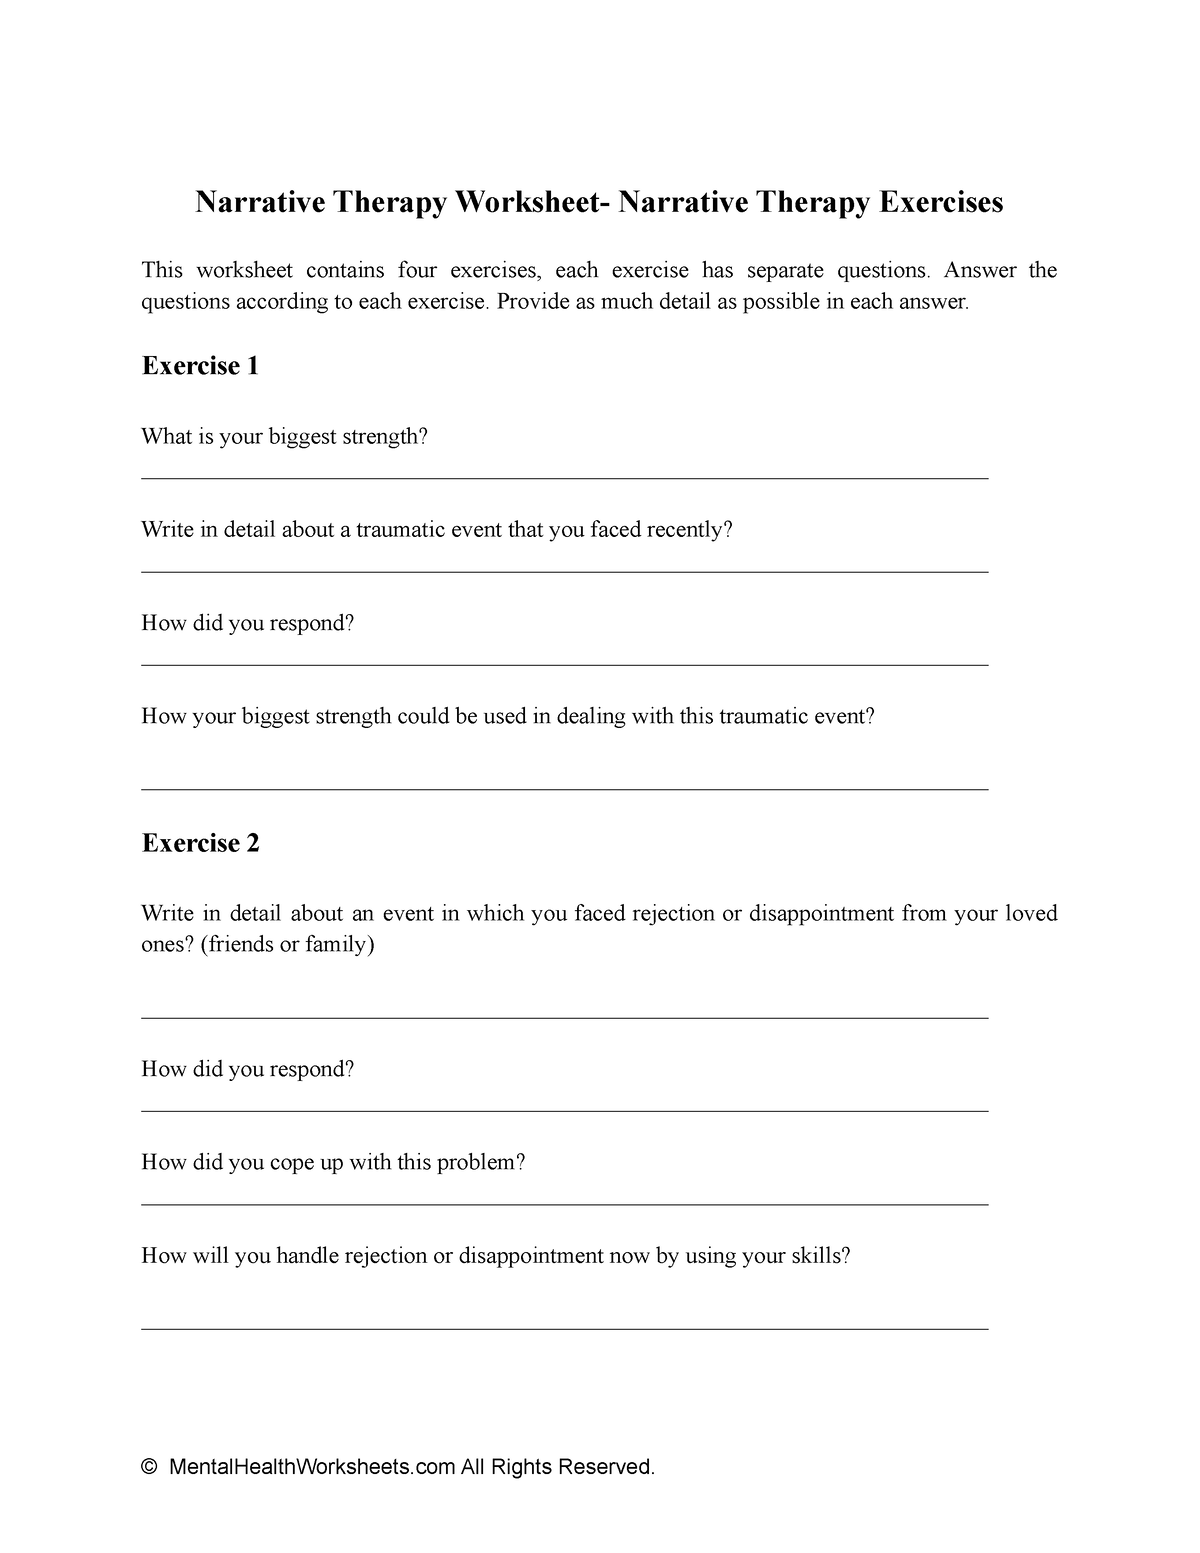 narrative-therapy-worksheet-narrative-therapy-exercises-answer-the